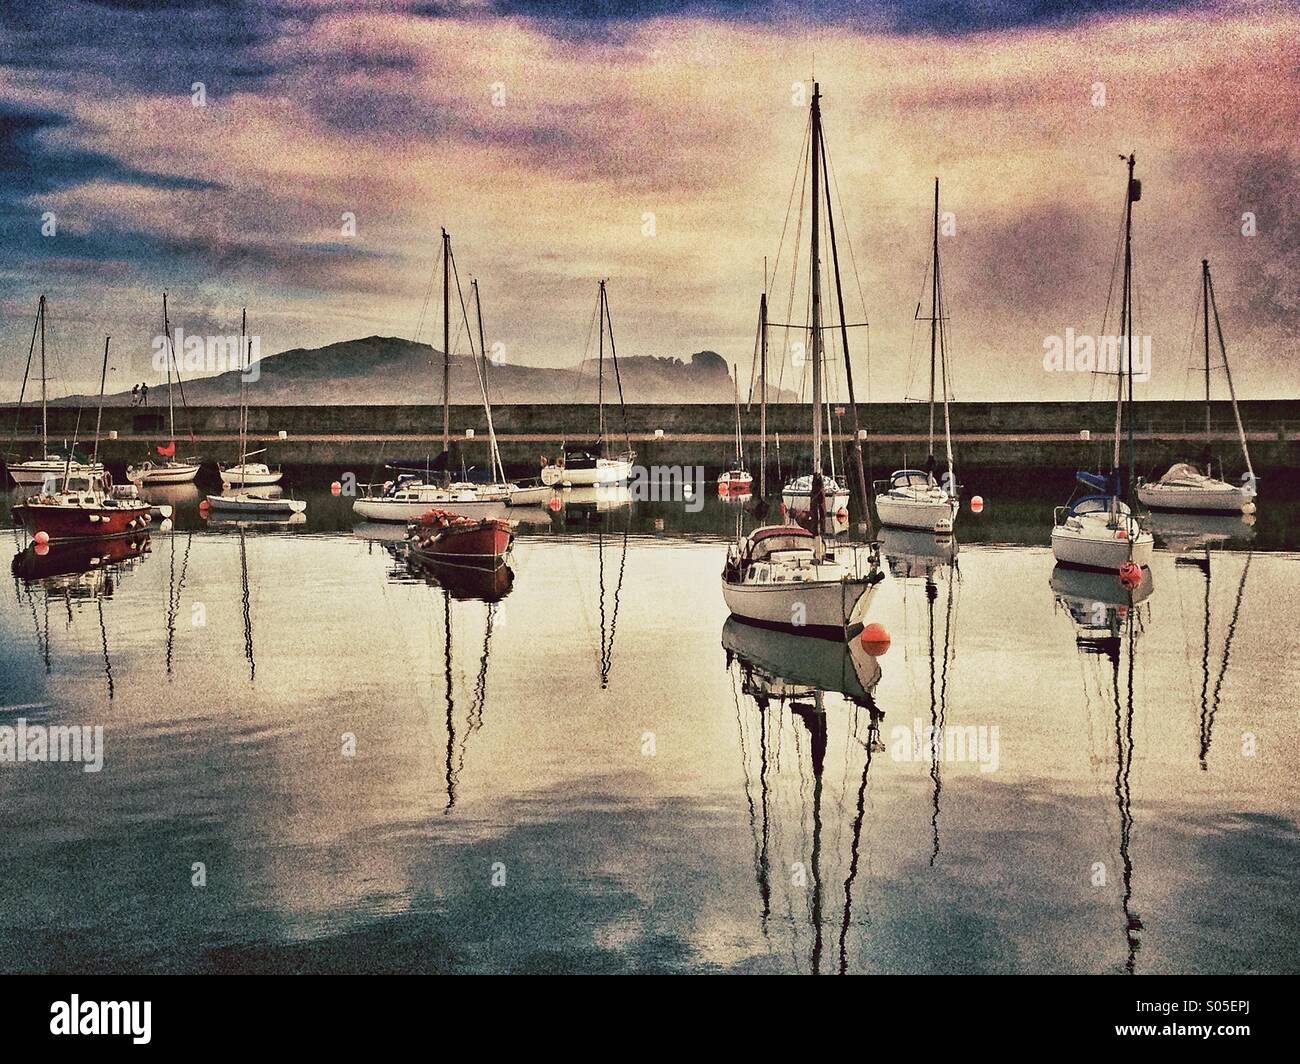 Yachts moored in harbour with Island in background Stock Photo